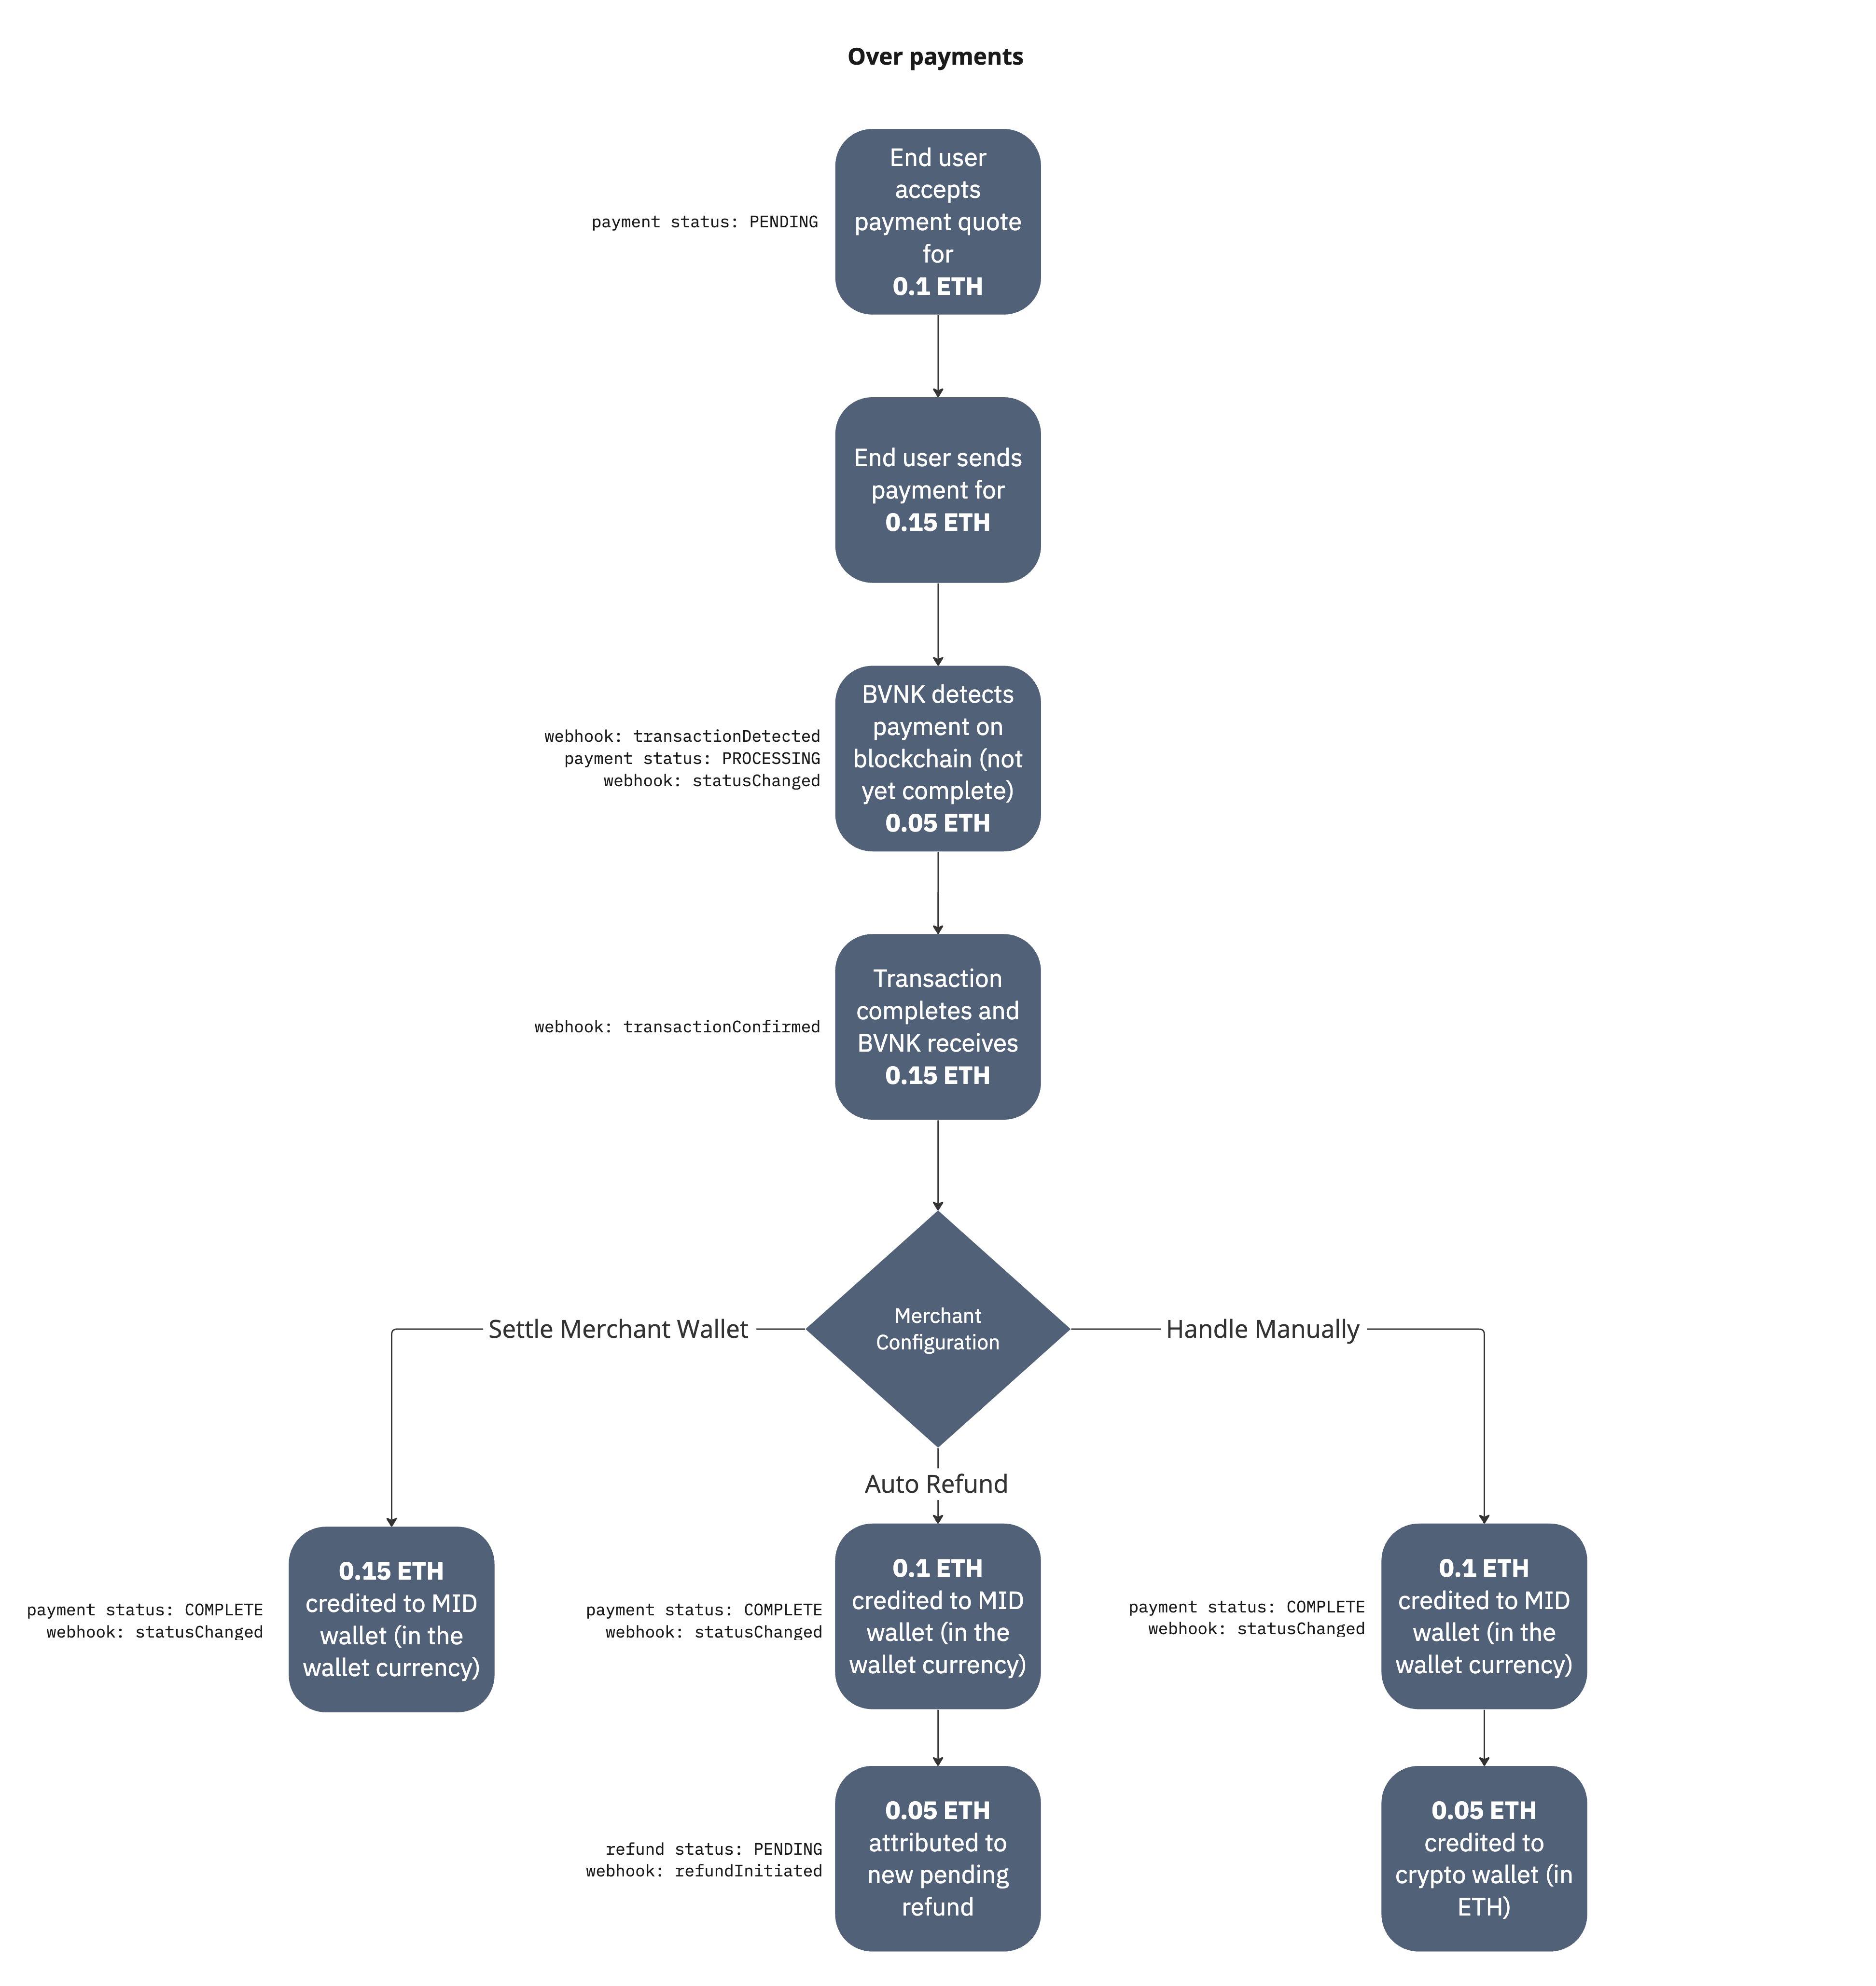 Over payments process flow